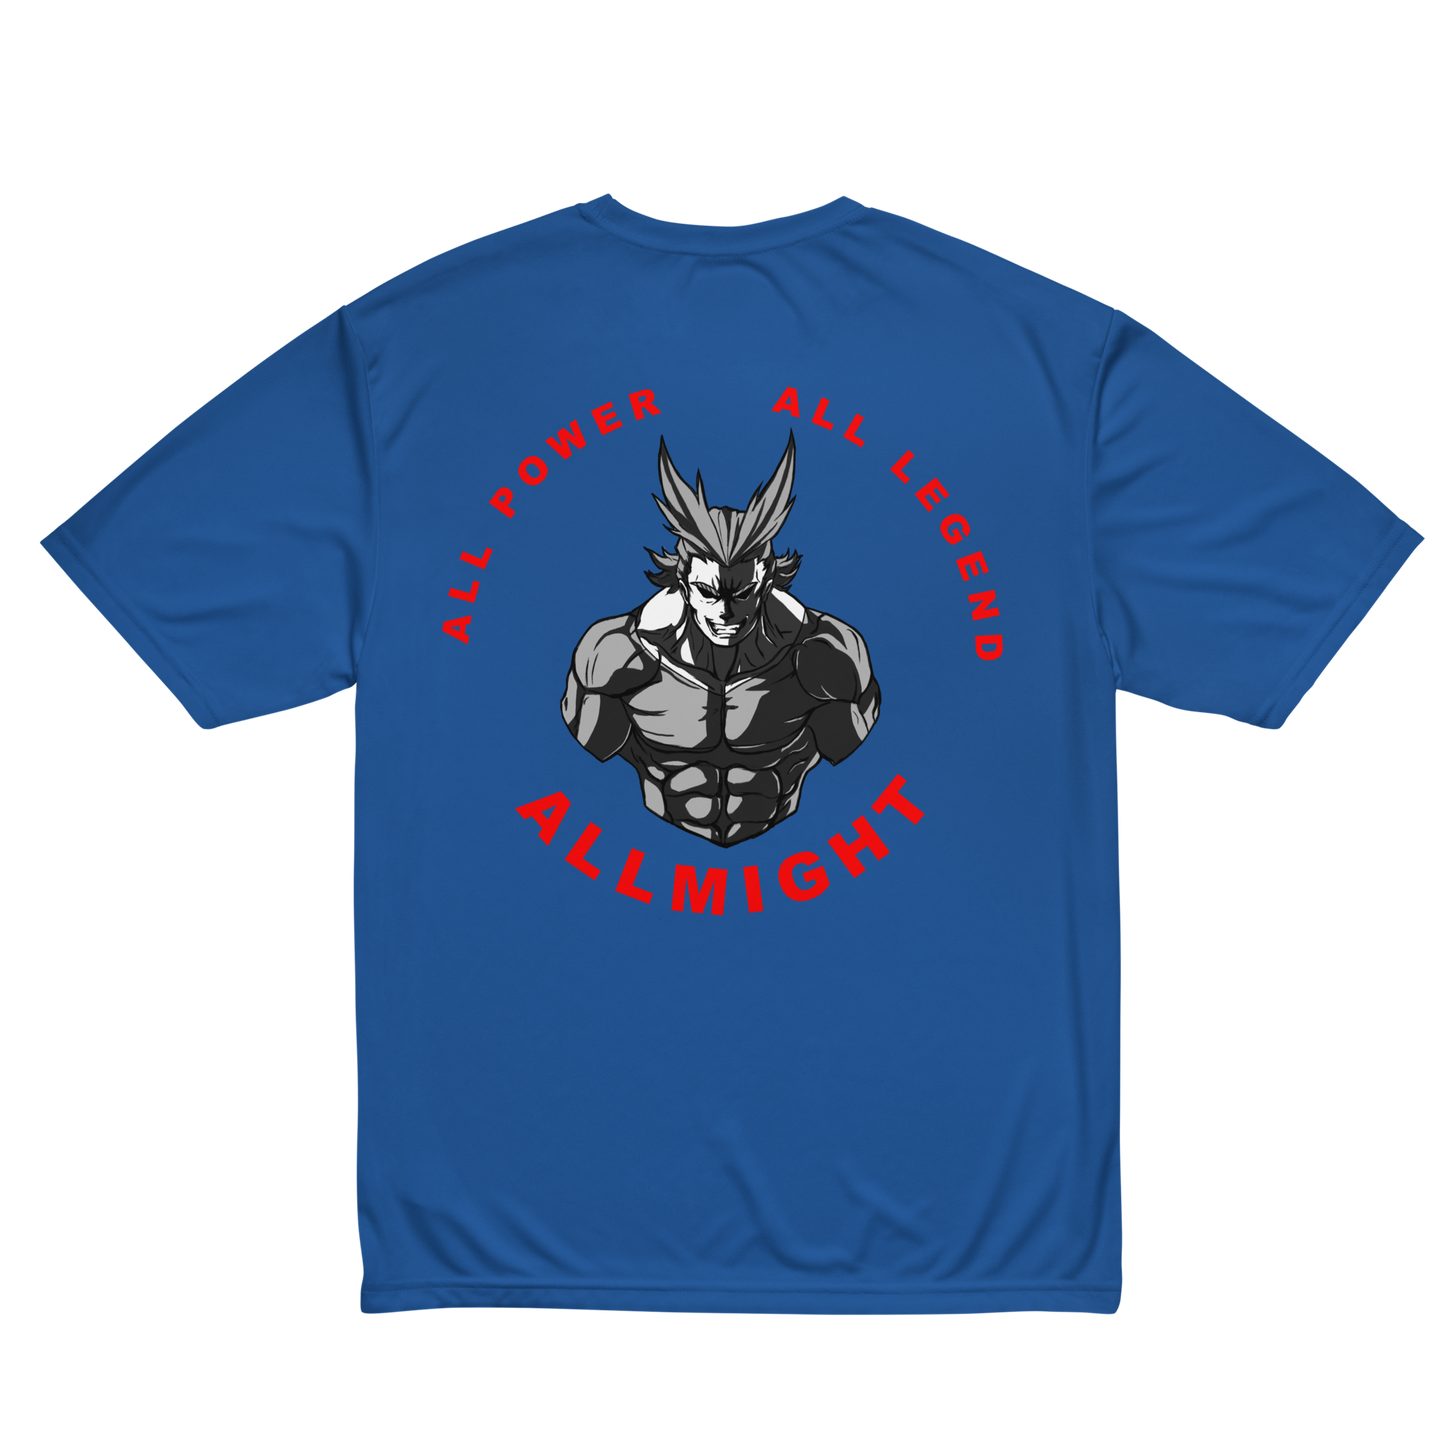 All Might Unisex Dry Fit T-shirt